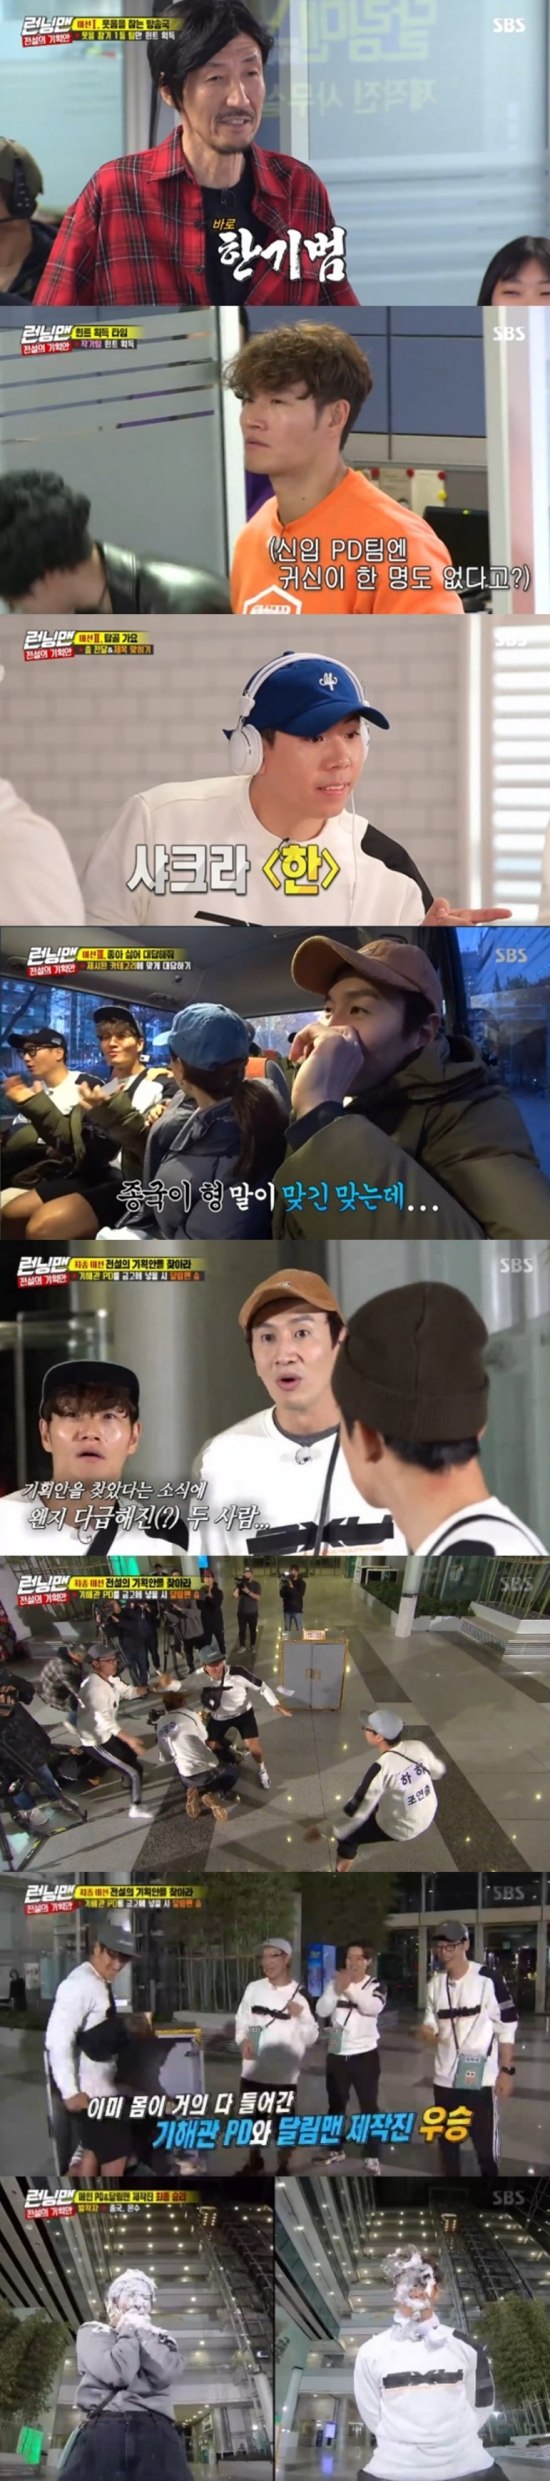 The Identity of Running Man was Seo Eun-soo and Kim Jong-kook.SBS Running Man, which was broadcast on the 24th, ranked first in entertainment in the same time zone with 2049 target TV viewer ratings of 4%.The average TV viewer ratings were 5.7% in the first part and 7.5% in the second part, while the highest TV viewer ratings per minute soared to 9.2%.(Based on the second part of the Seoul Metropolitan Area of Nielsen Korea)The broadcast was decorated with the Legendary Plan Race, which followed last week, and the members struggle to find Kolocki and the angle was drawn.With Godseven camp, actor Seo Eun-soo, Choi Lee, and comedian Hur Kyung-hwan as guests, the members were divided into PD, writer, and new PD team of the Running Man program and challenged the first mission, Broadcasting for Laughing.The members burst into laughter bombings from the melon navel tool uncle to Yondu general manager, and Han Ki-bum, who appeared in Laughing Inclusion Race last time, appeared as a wedge-biting three-member girl group Hans Band and held a big laughing bomb.The writer team was able to get the hint by laughing the least, and the writer team found that the new PD team had no collocide with Kollok.The second mission Topgol Song was a mission to hit the hit choreography of the hit song, but the members failed to get hints due to successive failures.The third round was played out against the background of the station, and Koloki and the other members were immersed in identifying hints everywhere, but Koloki and the other members had to be eliminated.Starting with Chois elimination, which had been suspected by everyone, Jeon So-min, Song Ji-hyo, and Yang Se-chan were in-N-Out Burger, and Yoo Jae-Suk put Collock Seo Eun-soo in-N-Out Burger based on the hint that the assistant director is a woman.Now, with only the Identity of the Pick left, Kim Jong-kook and Lee Kwang-soo clashed.Lee Kwang-soo found out that the main PD had to go inside the safe and succeeded in the final mission.Kim Jong-kook and Seo Eun-soo were penalized for fresh cream as they ended with the victory of the Runman crew.Photo: SBS broadcast screen